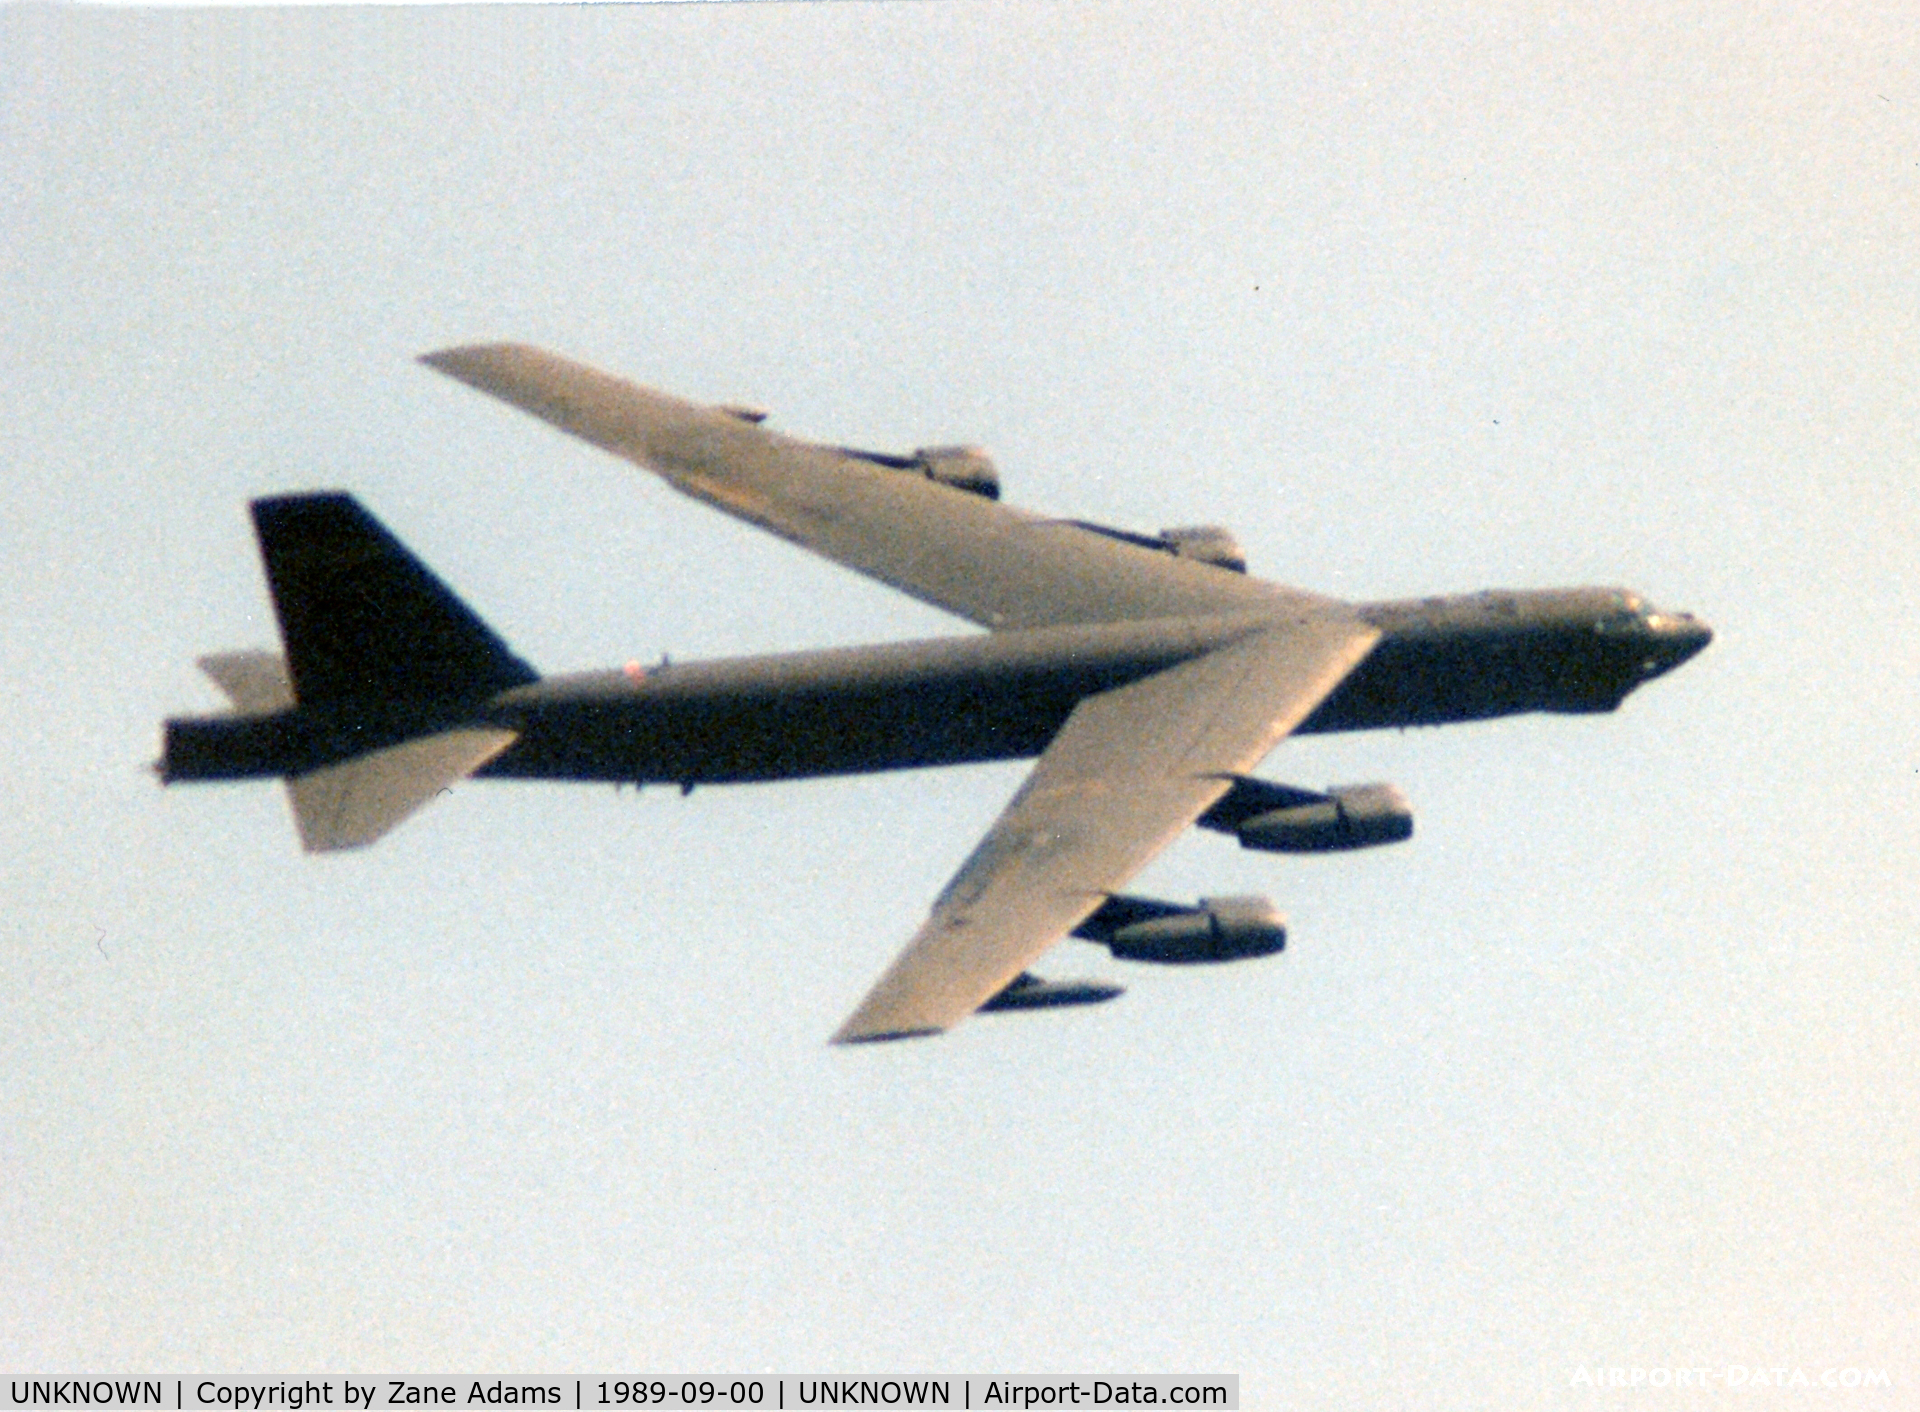 UNKNOWN, Boeing B-52G Stratofortress C/N Unknown, B-52 from Carswell AFB making a flyby at Meacham Field Airshow 1989